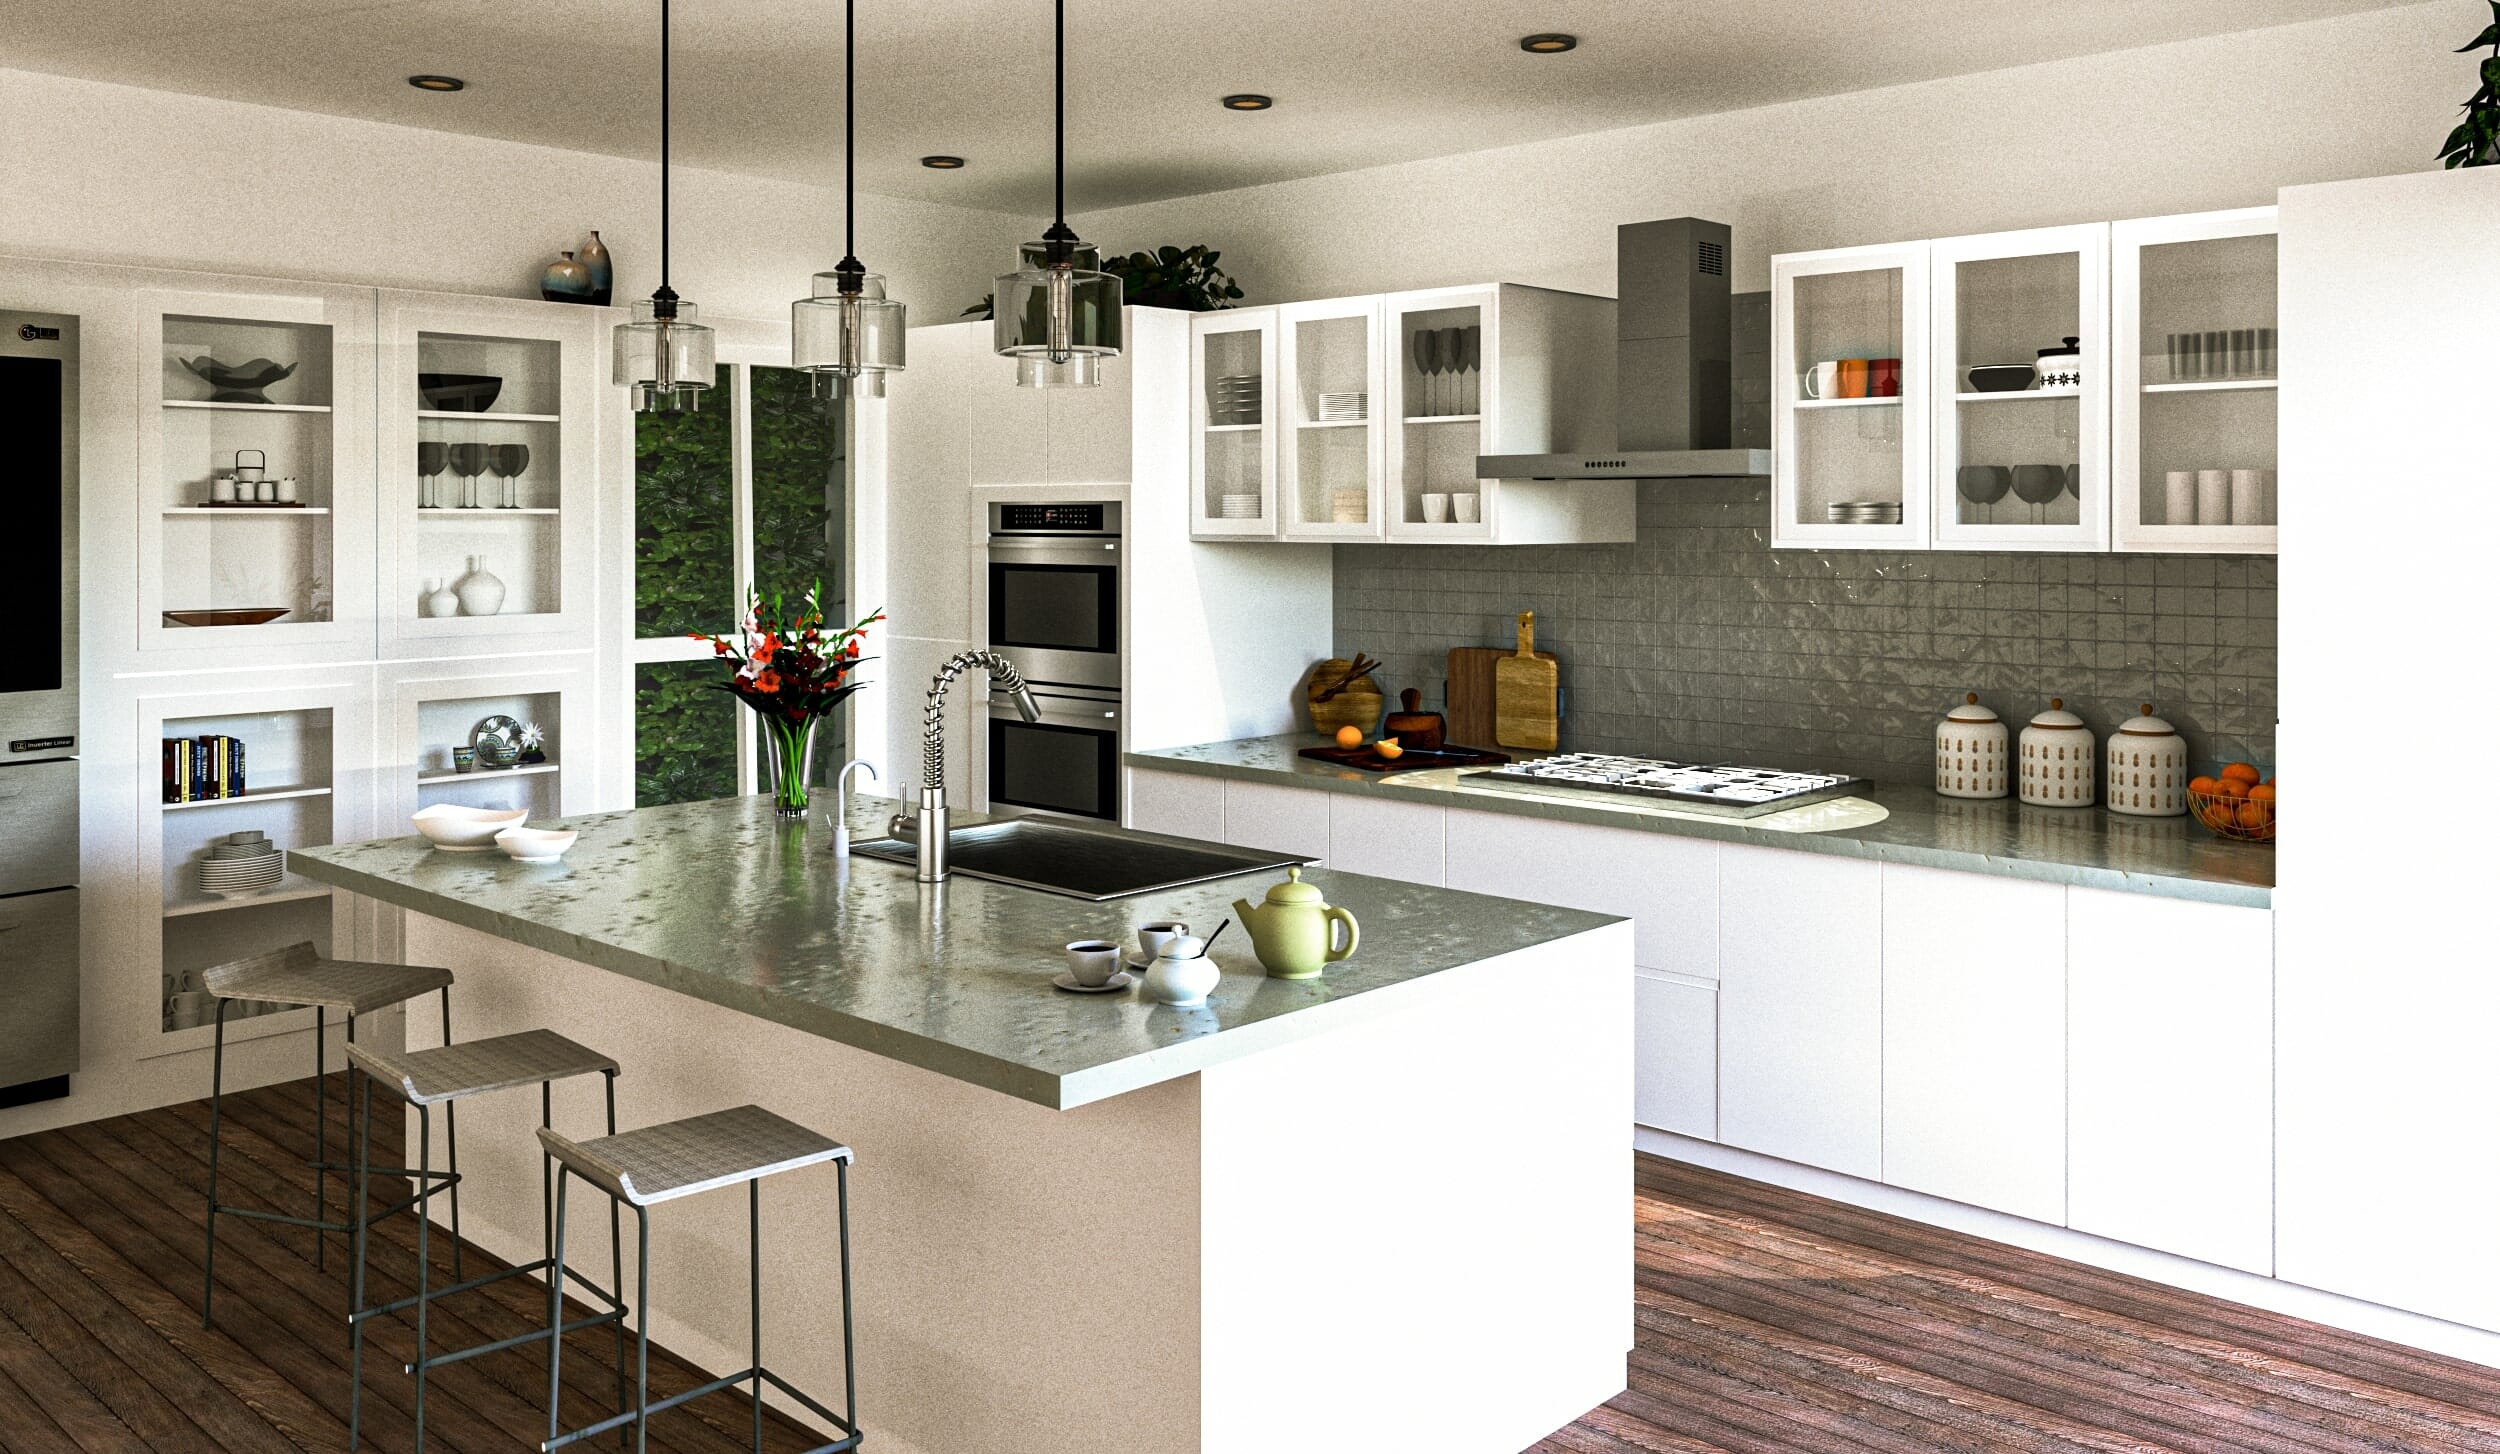 Contemporary kitchen by one of the top interior designers silicon valley - mini g